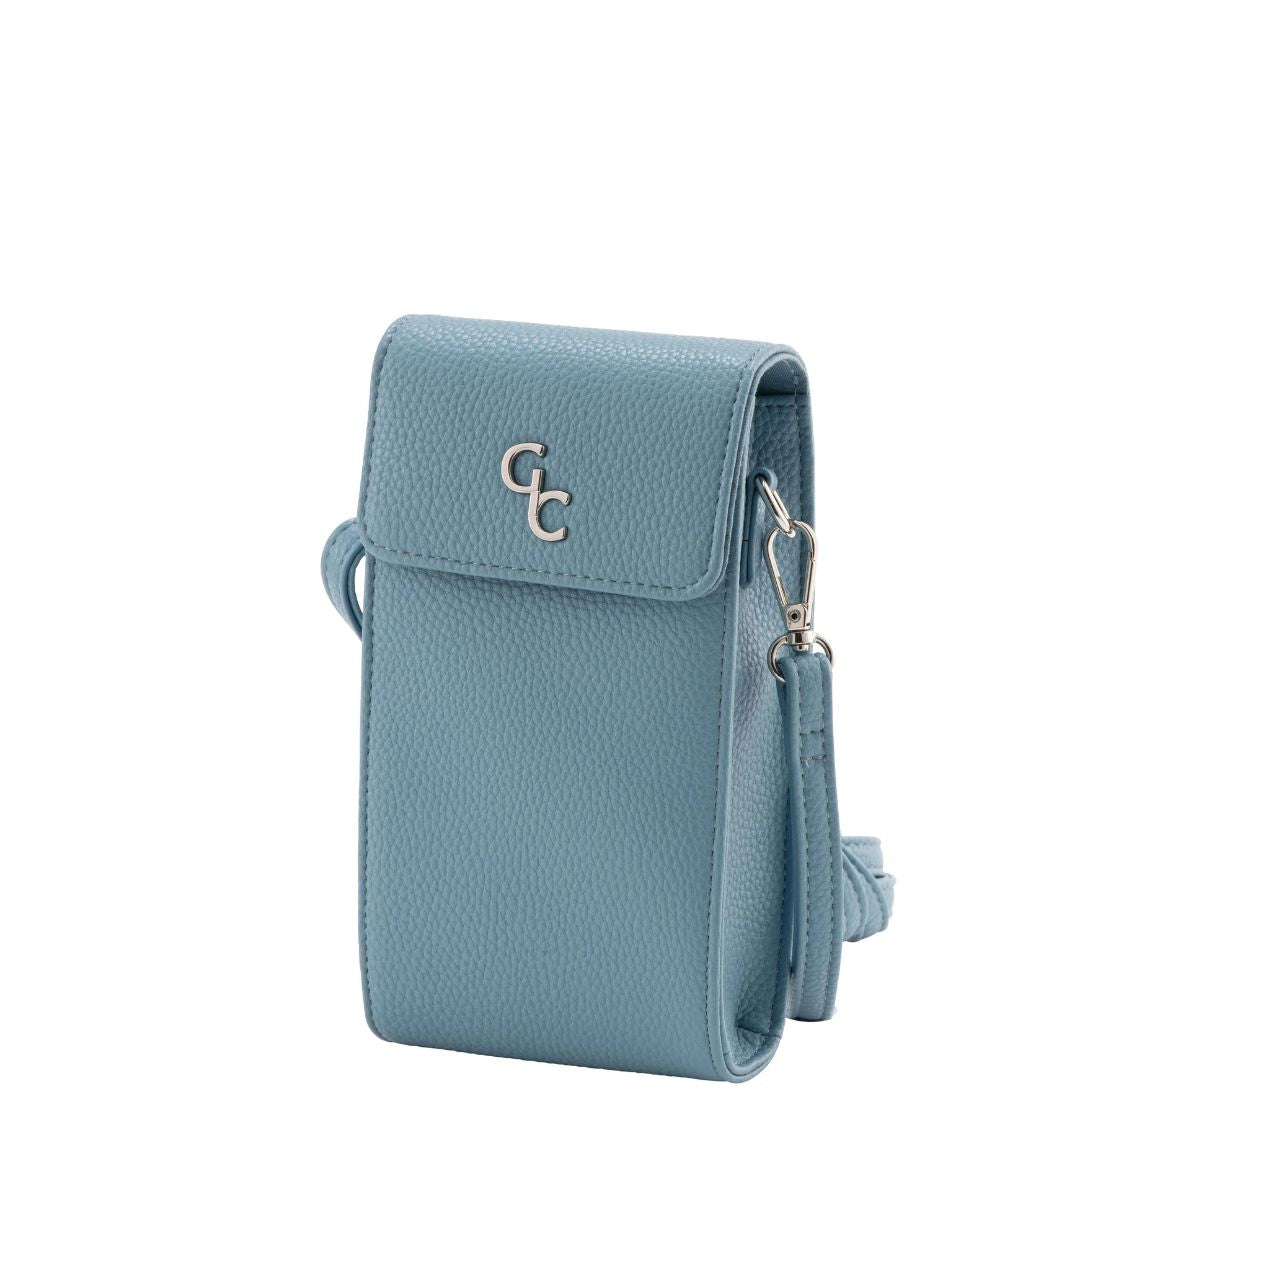 Mini Cross Body Bag - Light Blue by Galway Crystal  Introducing the new must have accessory that is truly functional. Our Light weight, Slim, Sleek, Crossbody bag is designed to hold the most essential accessory: Your mobile phone. There is nothing more liberating than carrying a lightweight bag that carries your essentials.